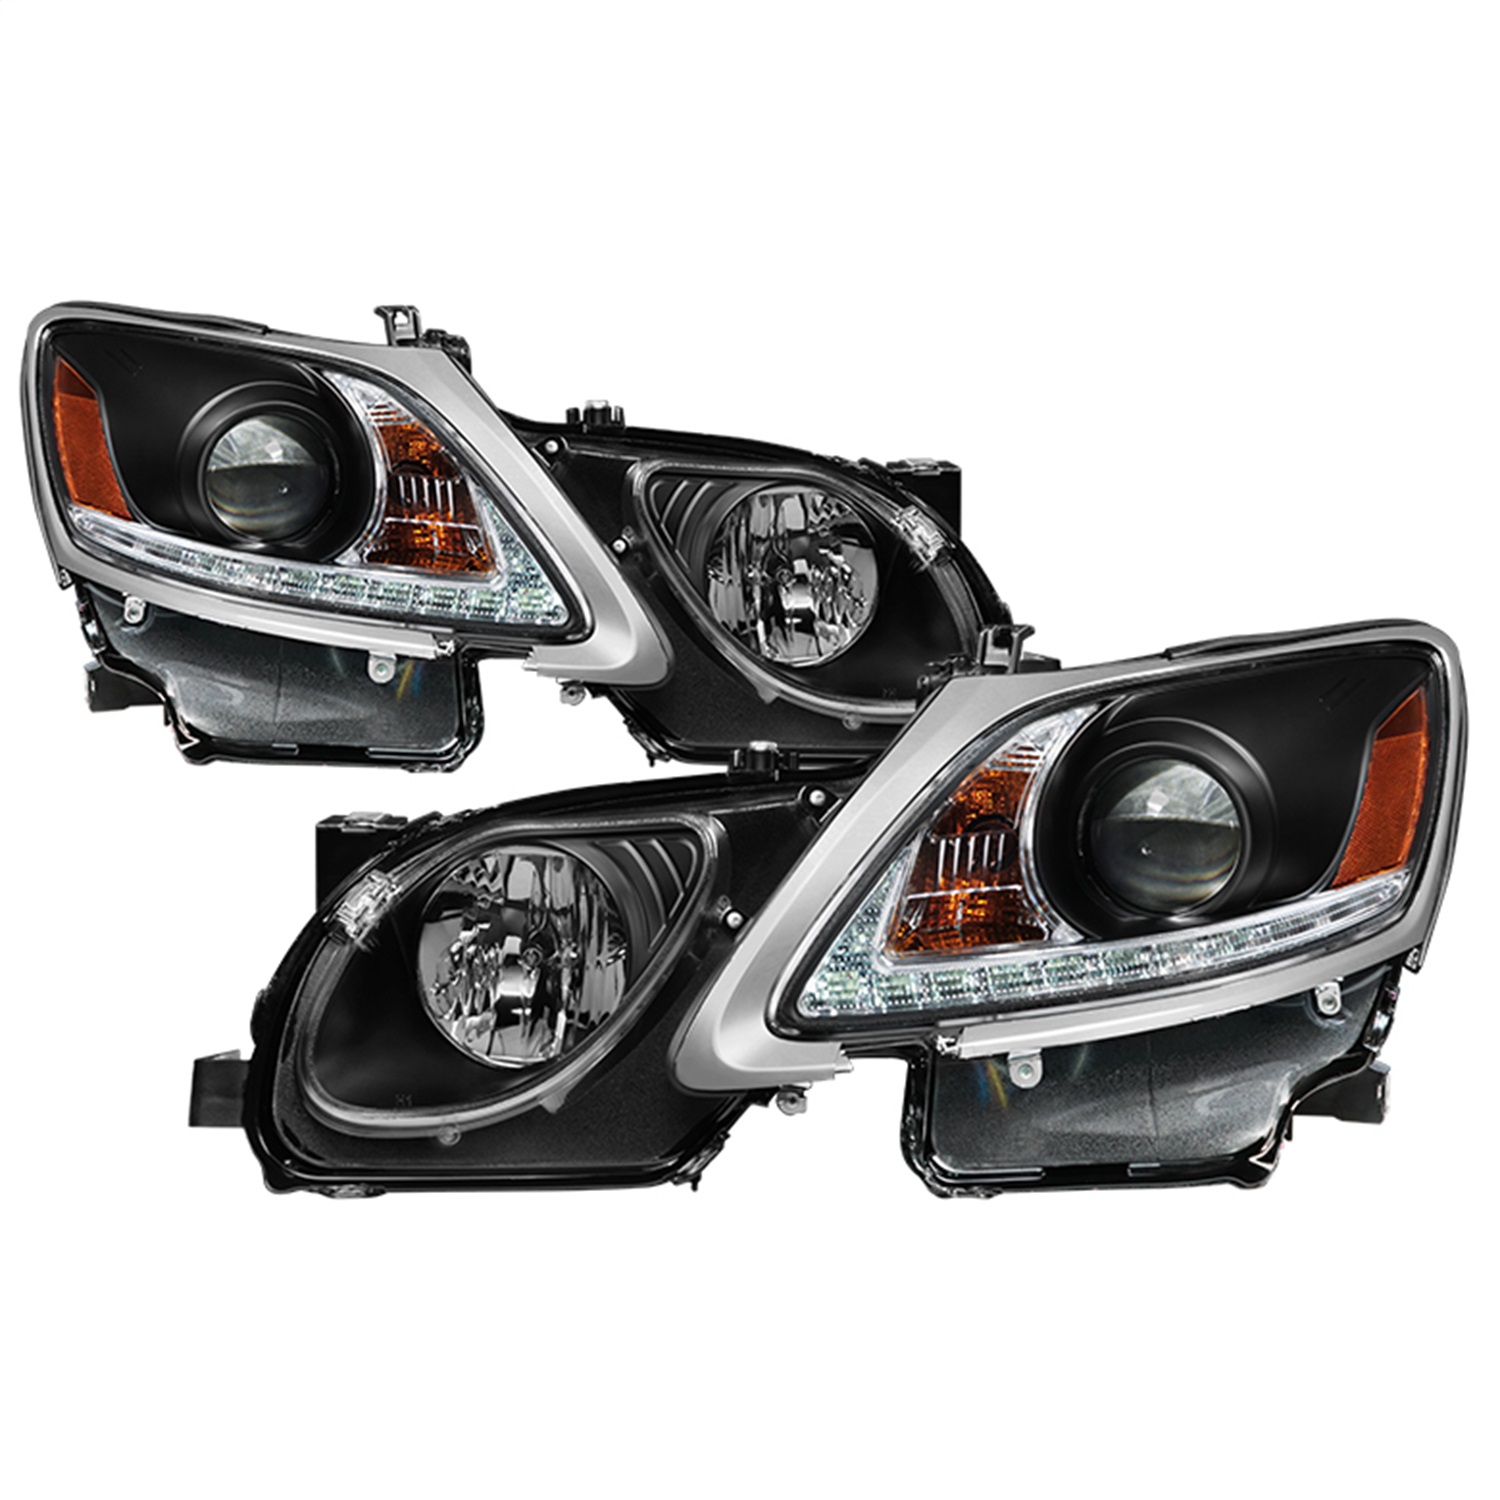 Spyder Auto 5082800 DRL LED Projector Headlights Fits GS300 GS350 GS450h GS460